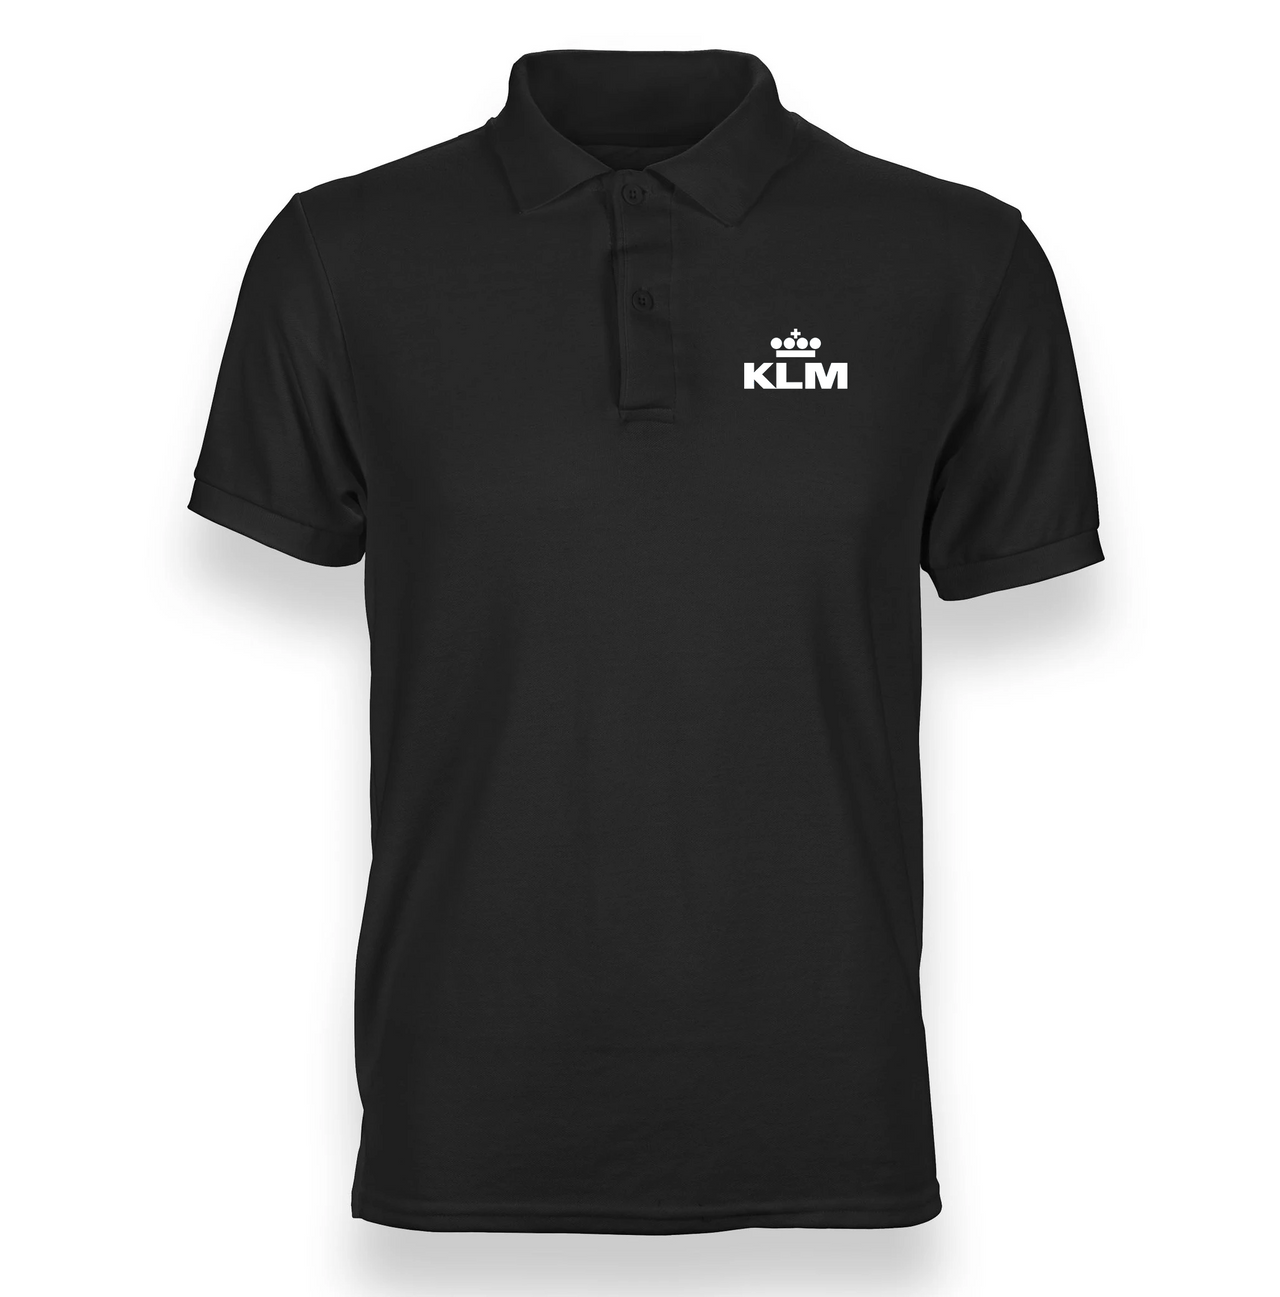 KLM AIRLINES POLO T-SHIRT